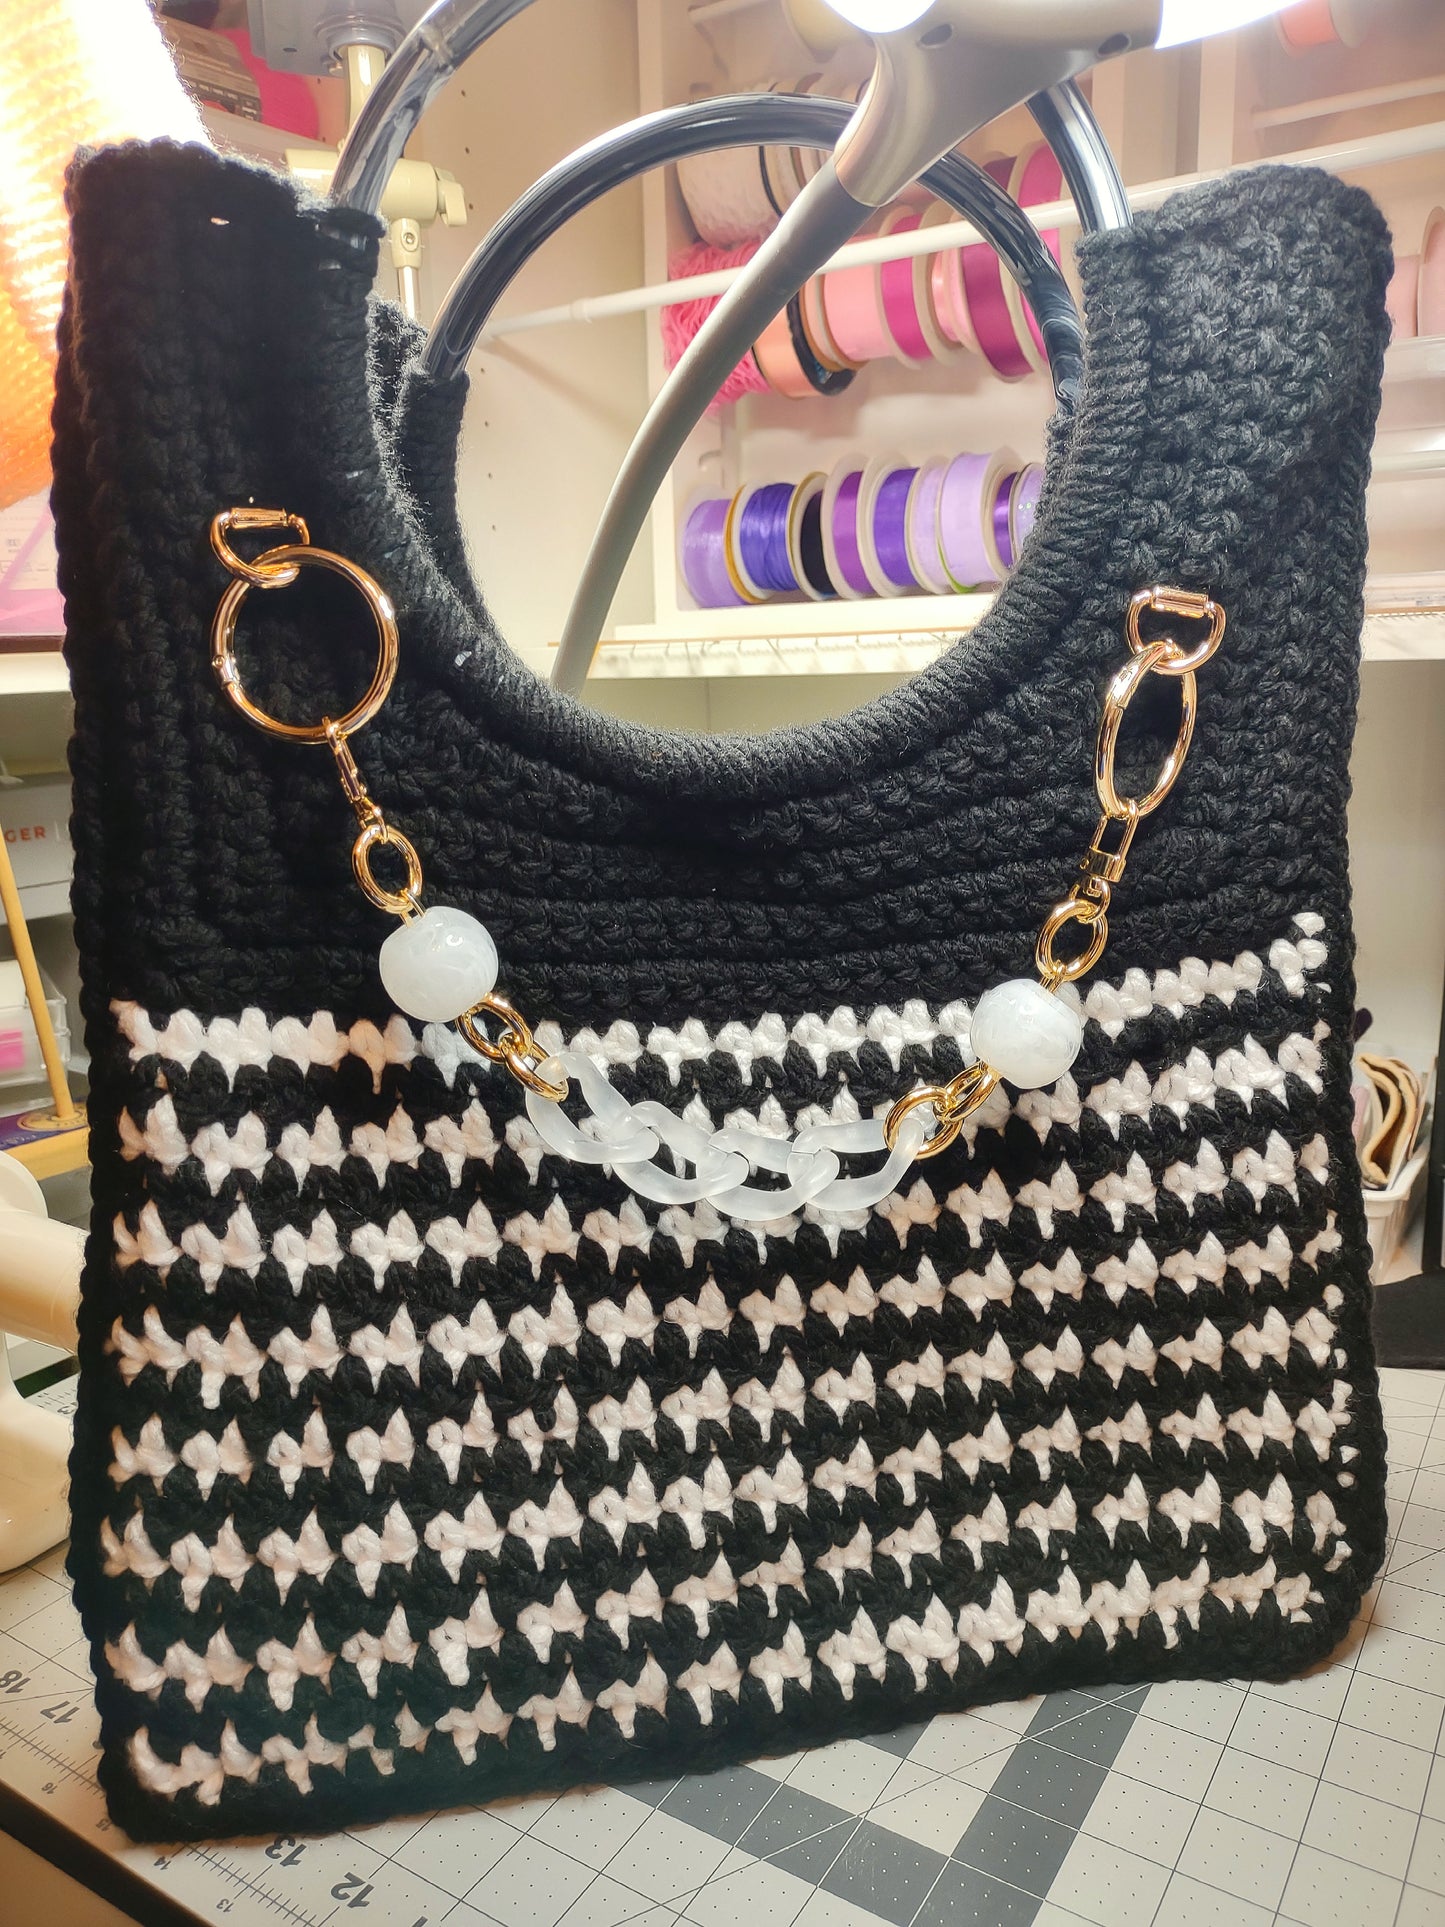 “Lela”  - Crochet Hounds Tooth Pattern Tote